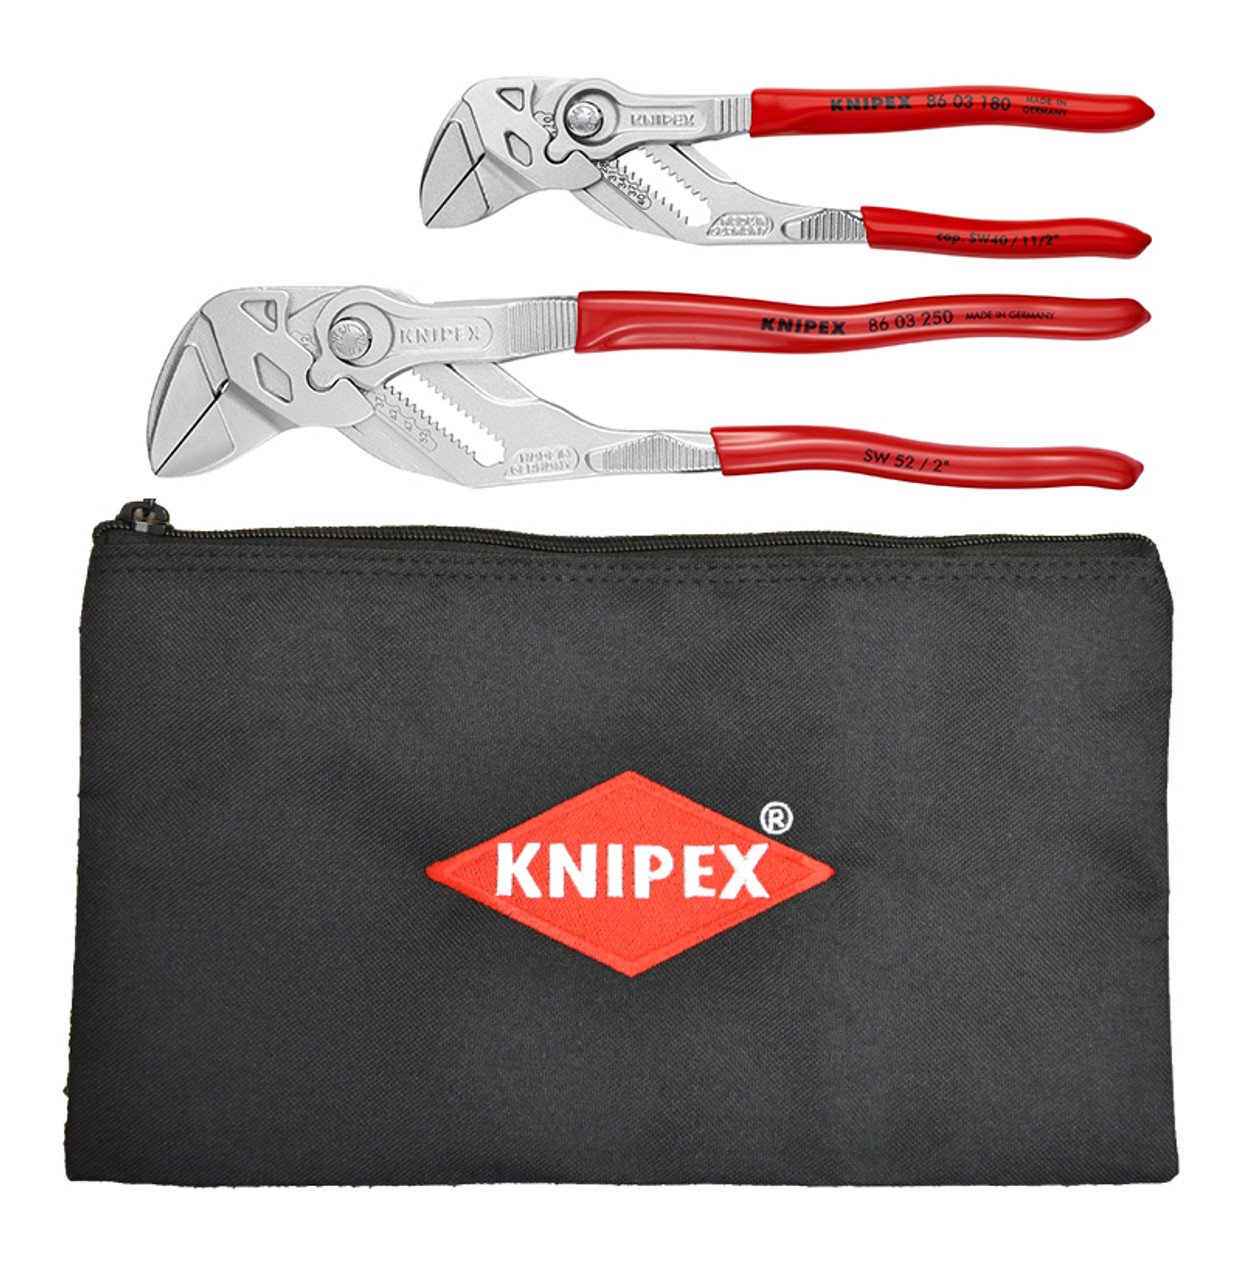 Knipex 5, 7, 10, & 12 Cobra Pliers Set with Tool Holder, 5 Pieces